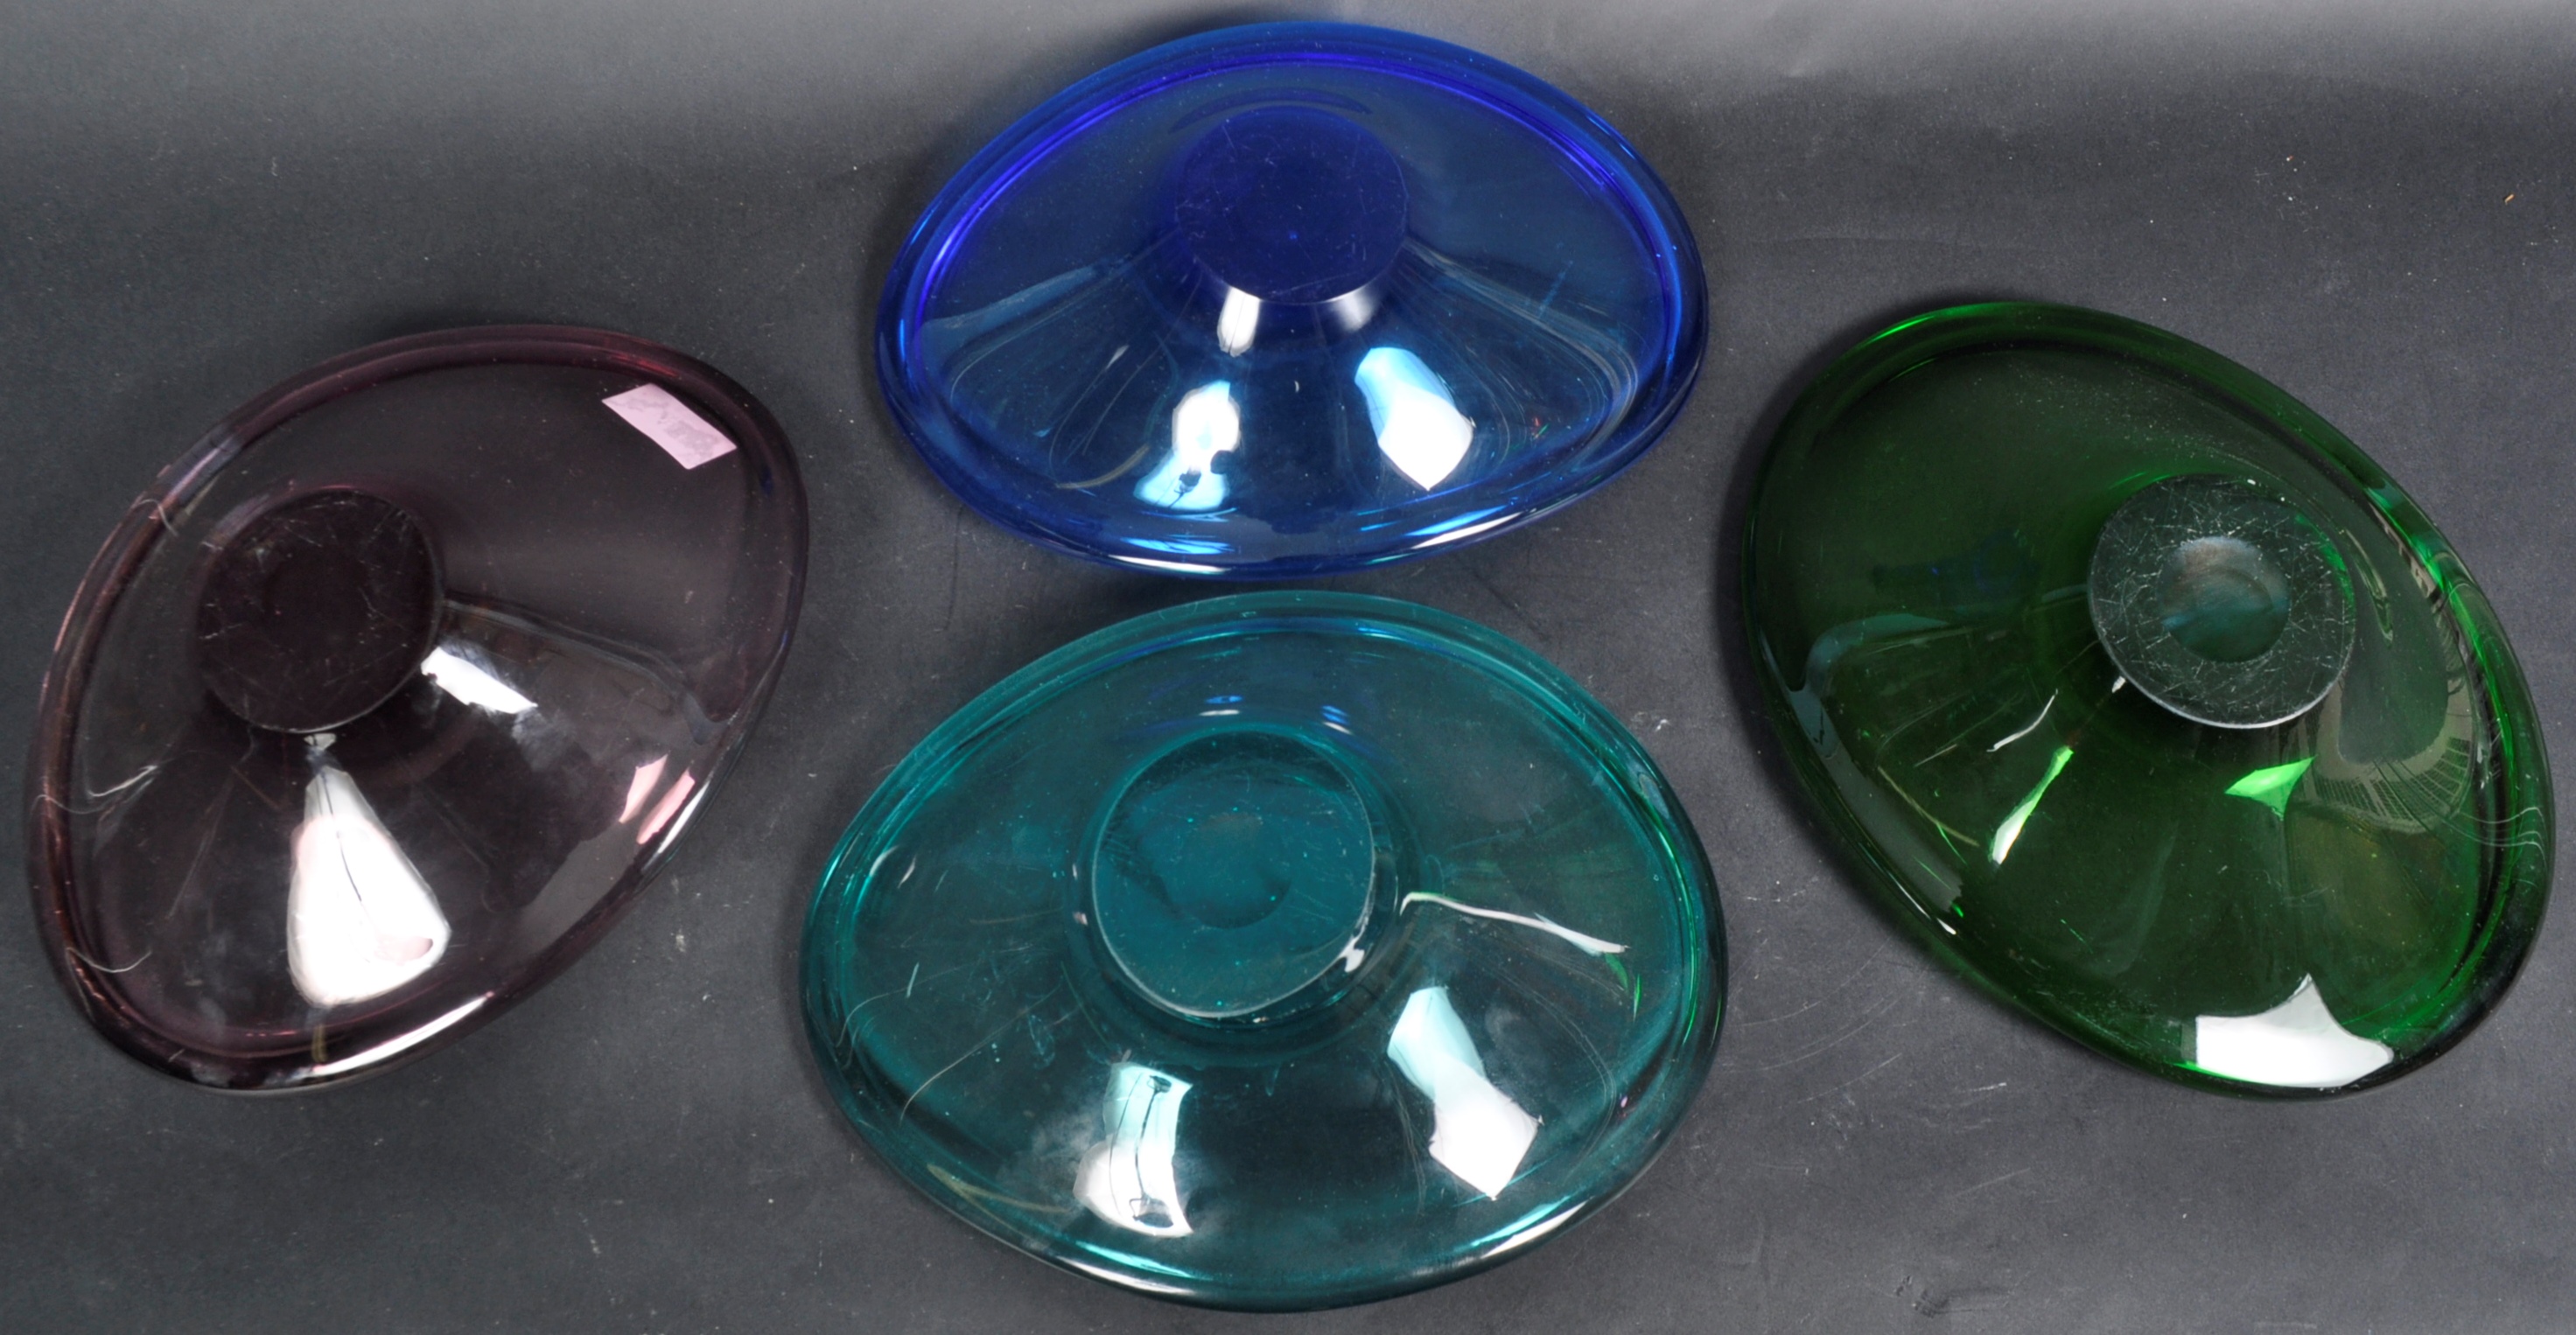 LOTTA PETTERSSON FOR IKEA - FOUR COLOURED GLASS DISHES - Image 6 of 6